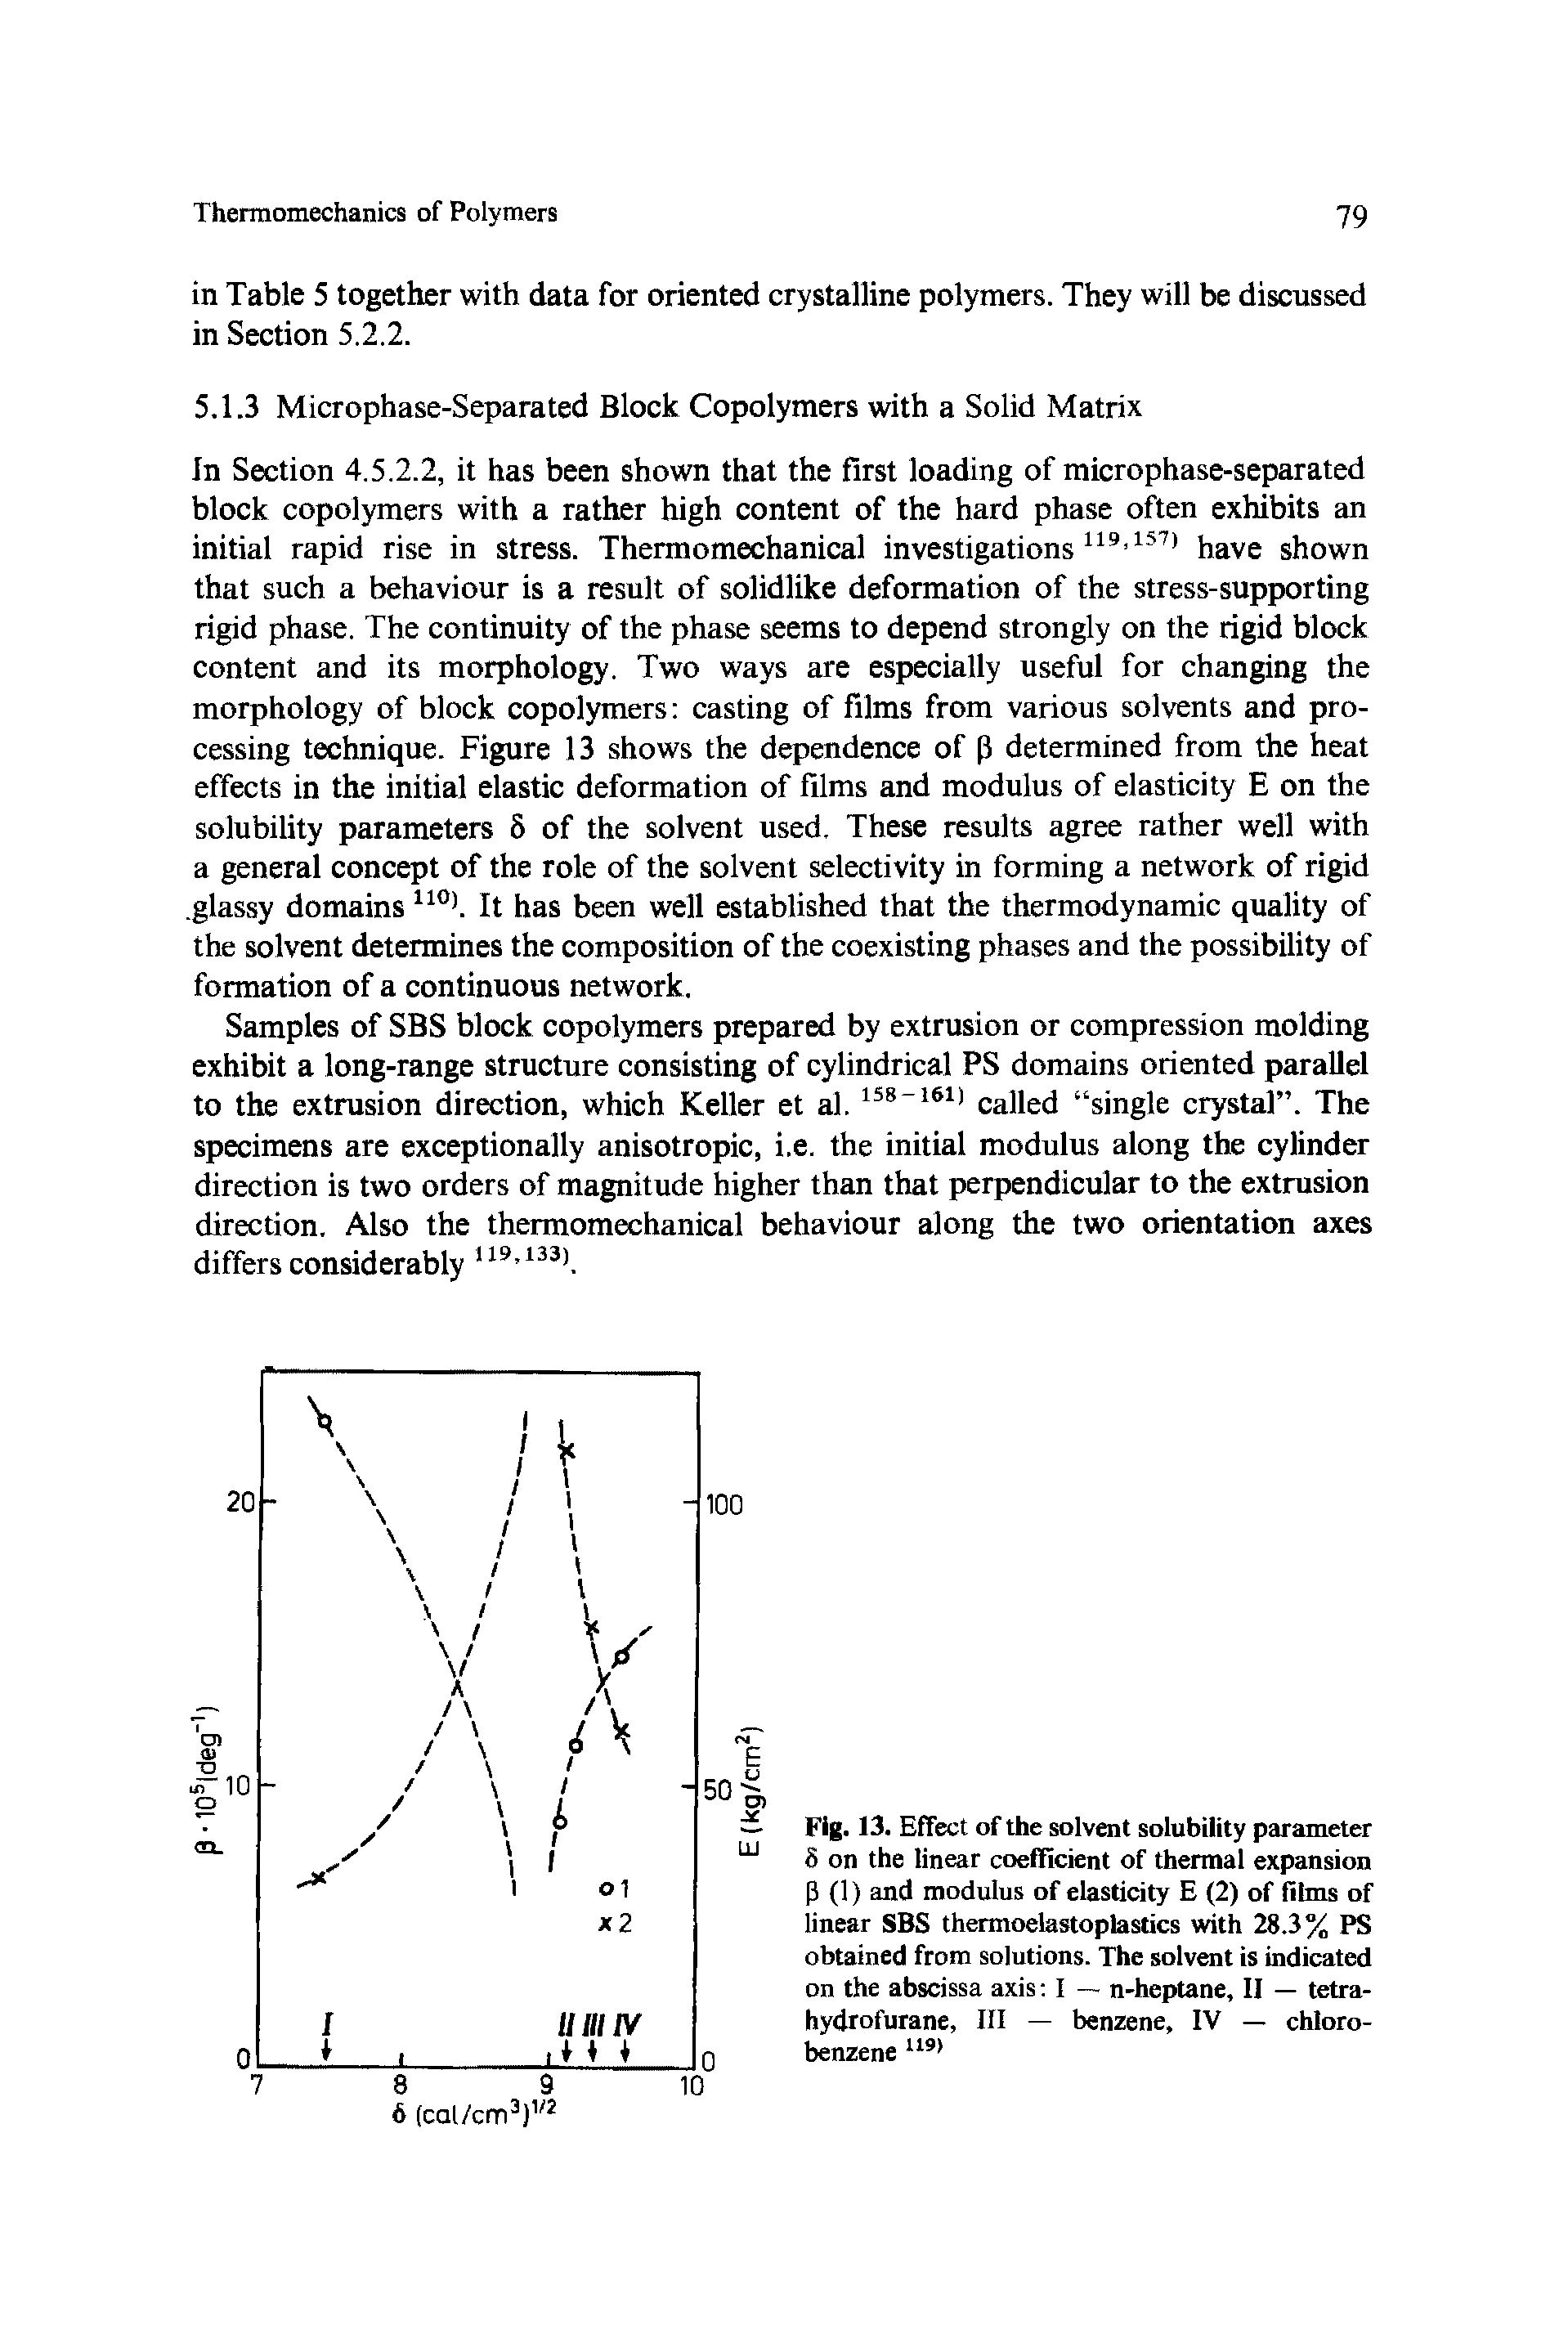 Fig. 13. Effect of the solvent solubility parameter 8 on the linear coefficient of thermal expansion 3 (1) and modulus of elasticity E (2) of films of linear SBS thermoelastoplastics with 28.3% PS obtained from solutions. The solvent is indicated on the abscissa axis I — n-heptane, II — tetra-hydrofurane, III — benzene, IV — chlorobenzene 119)...